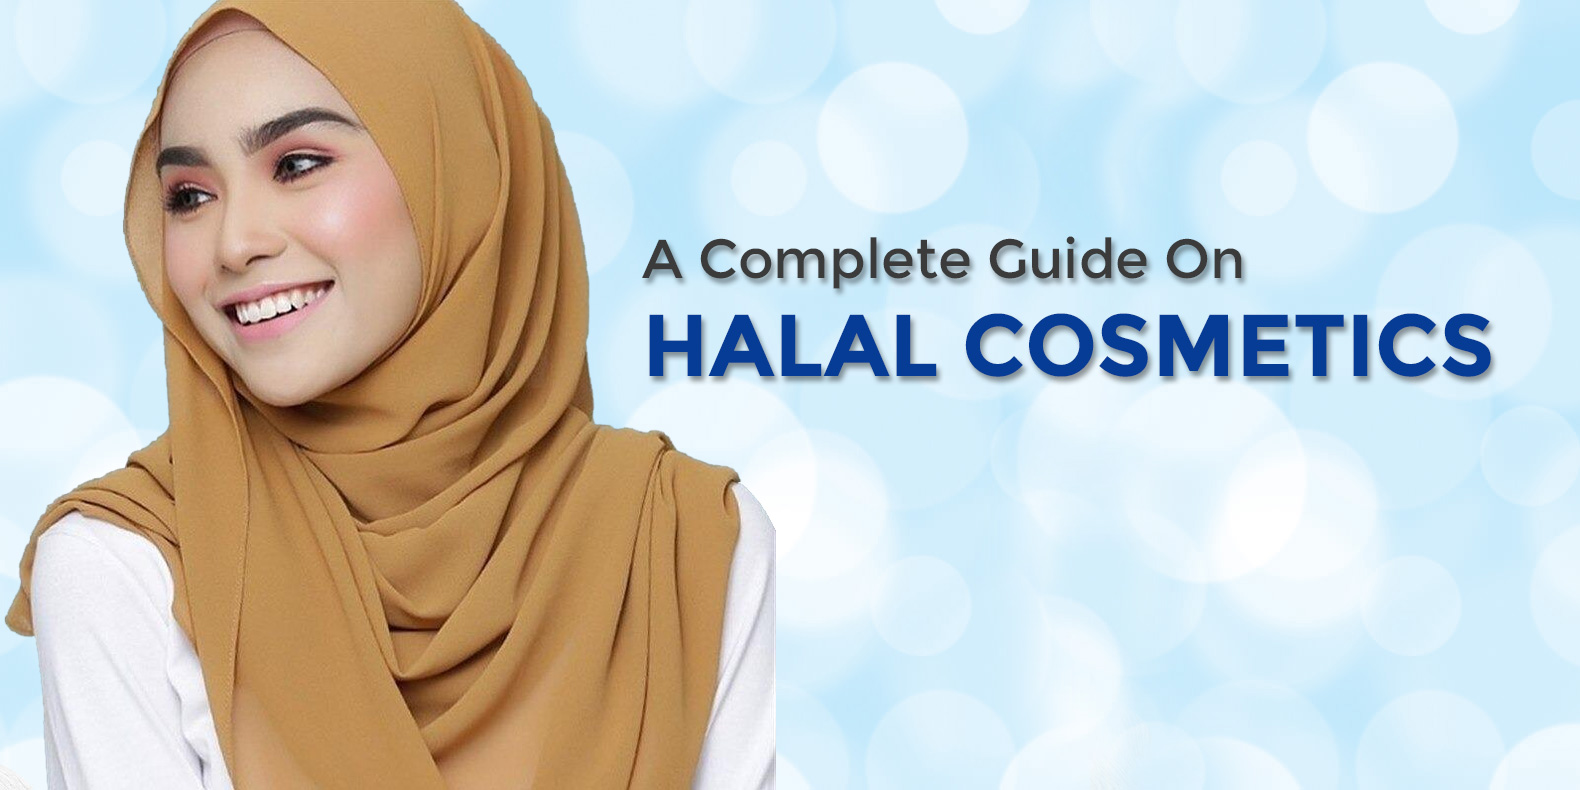 Your cosmetics might be haram! here's how to get 100% halal-certified cosmetics in India